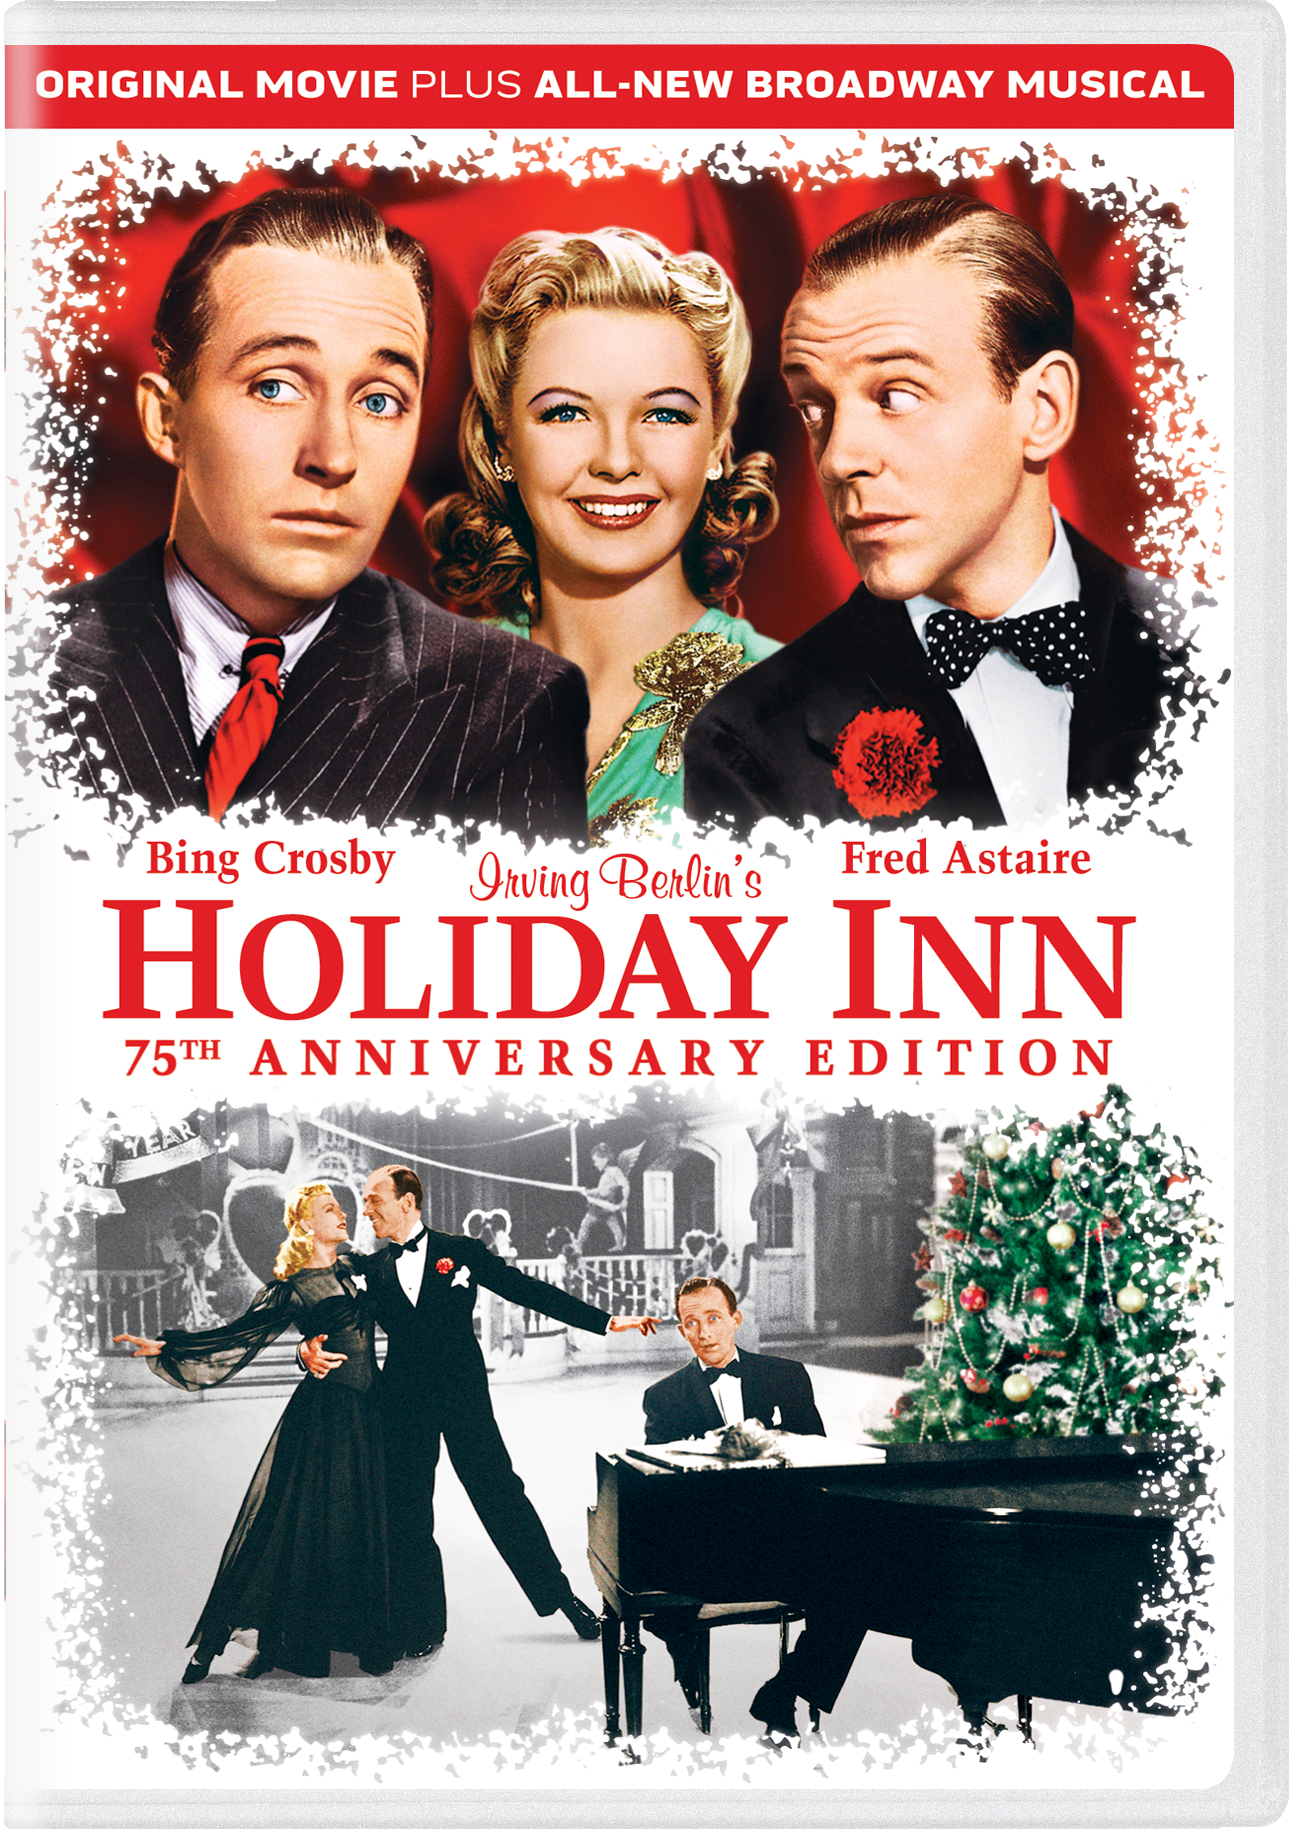 Holiday Inn (75th Anniversary Edition) - DVD [ 1942 ] - Musical Movies on DVD